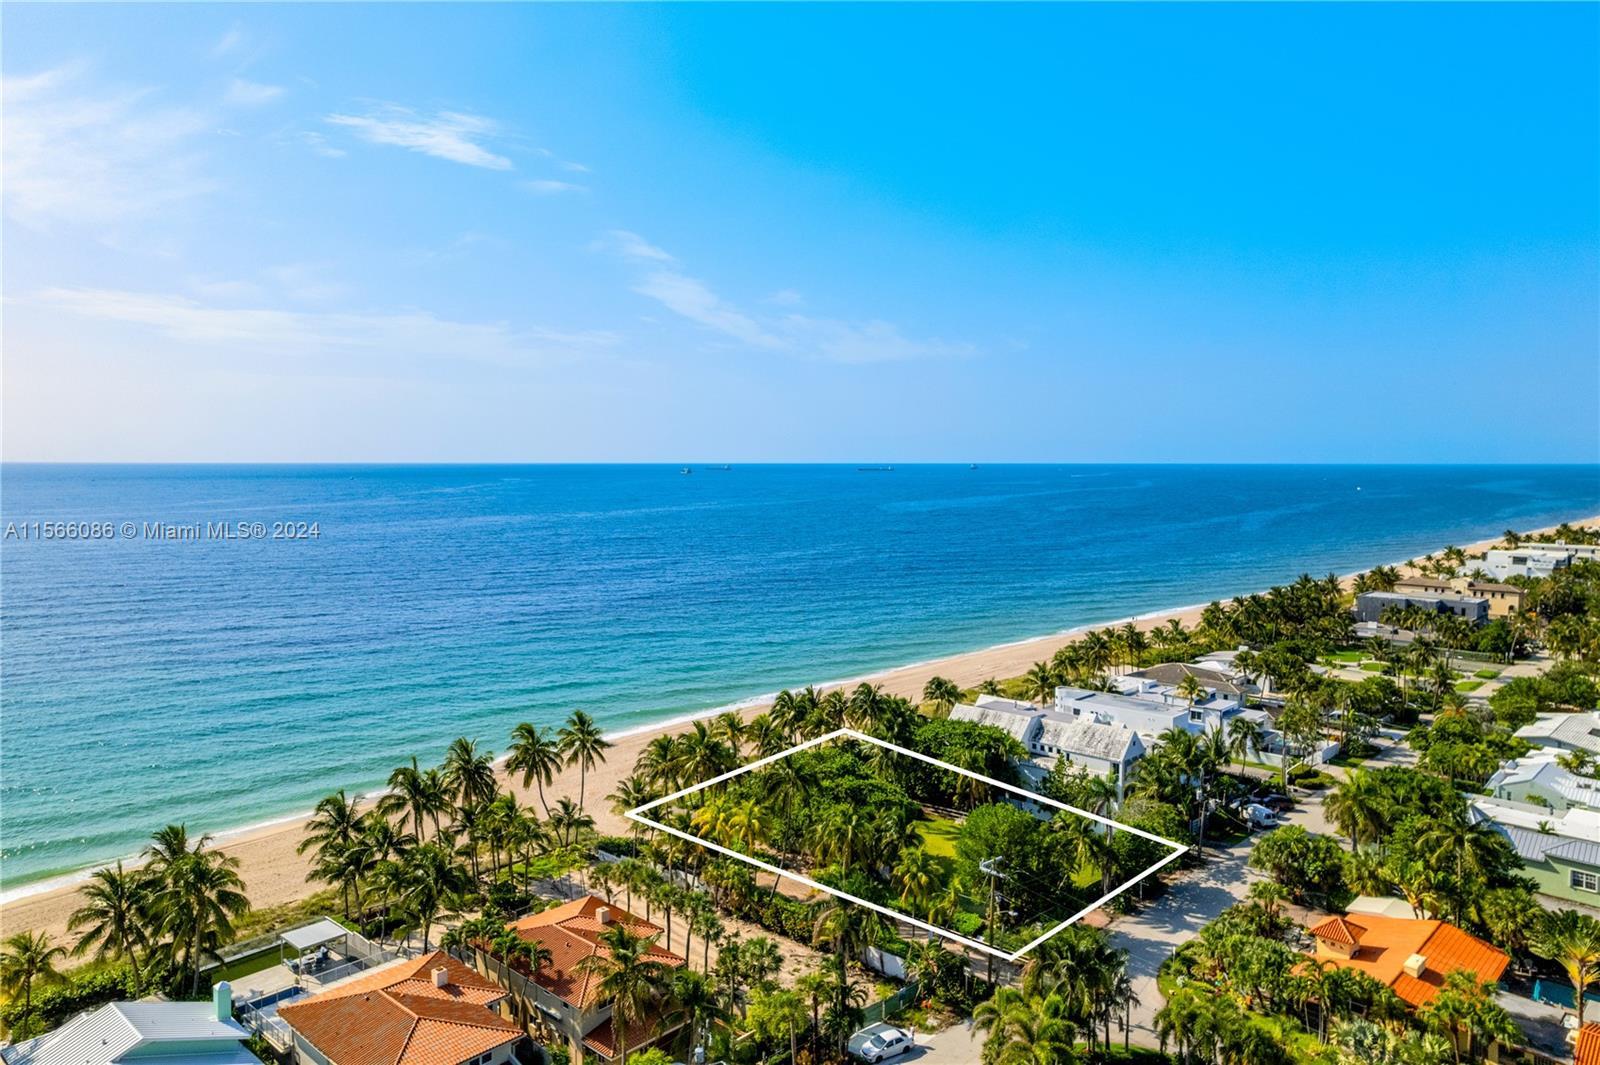 Experience the breathtaking beauty of this exceptional oceanfront property on Fort Lauderdale Beach.